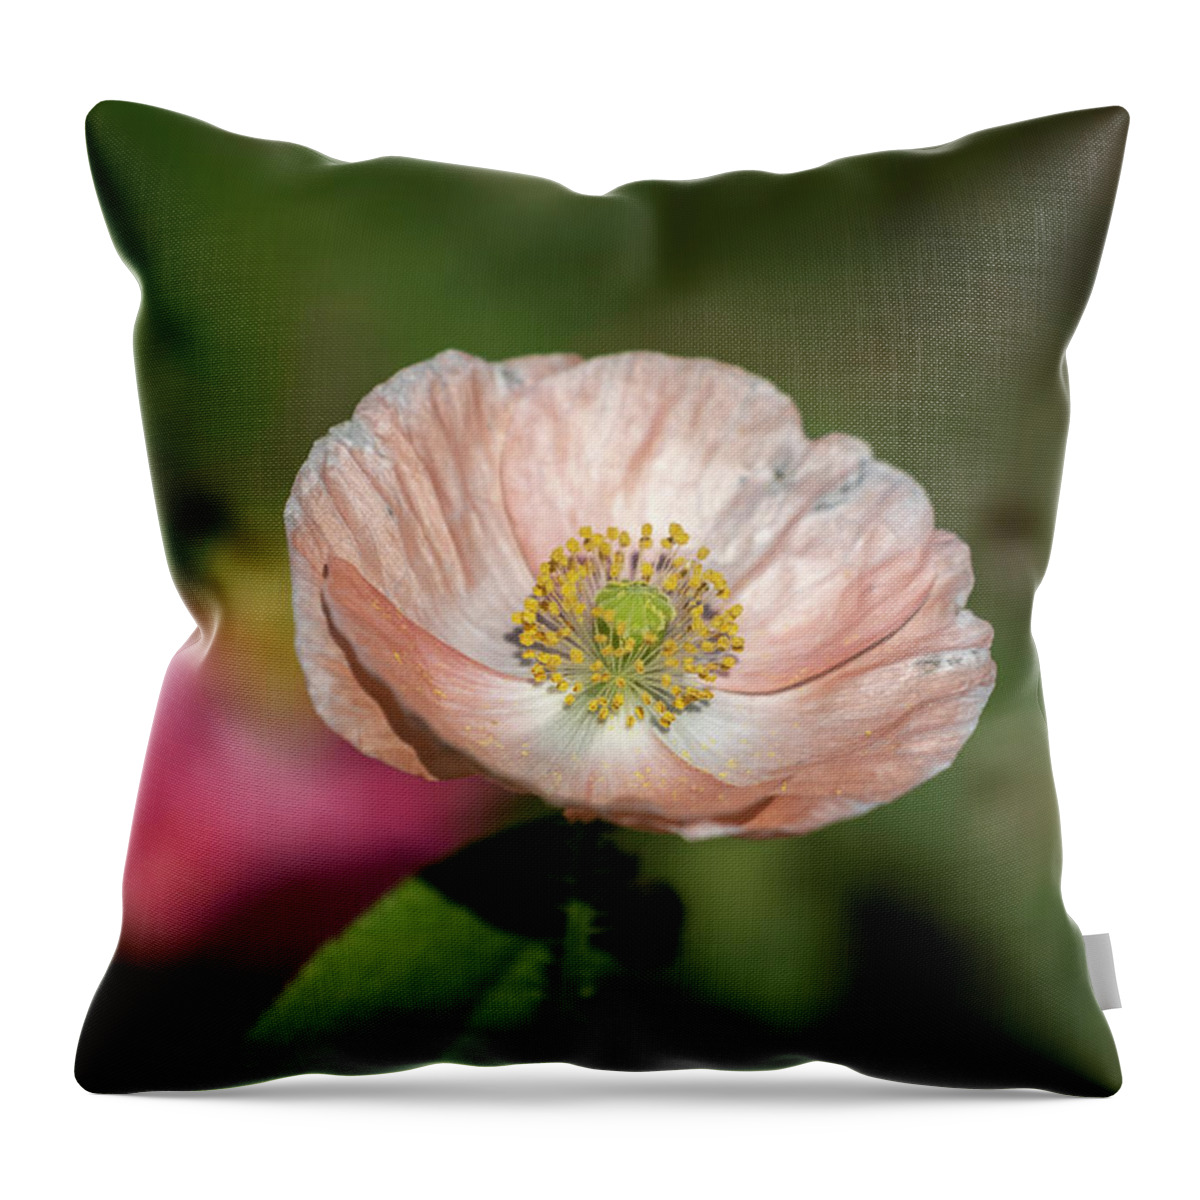  Throw Pillow featuring the photograph Shirley Poppy 2019-2 by Thomas Young